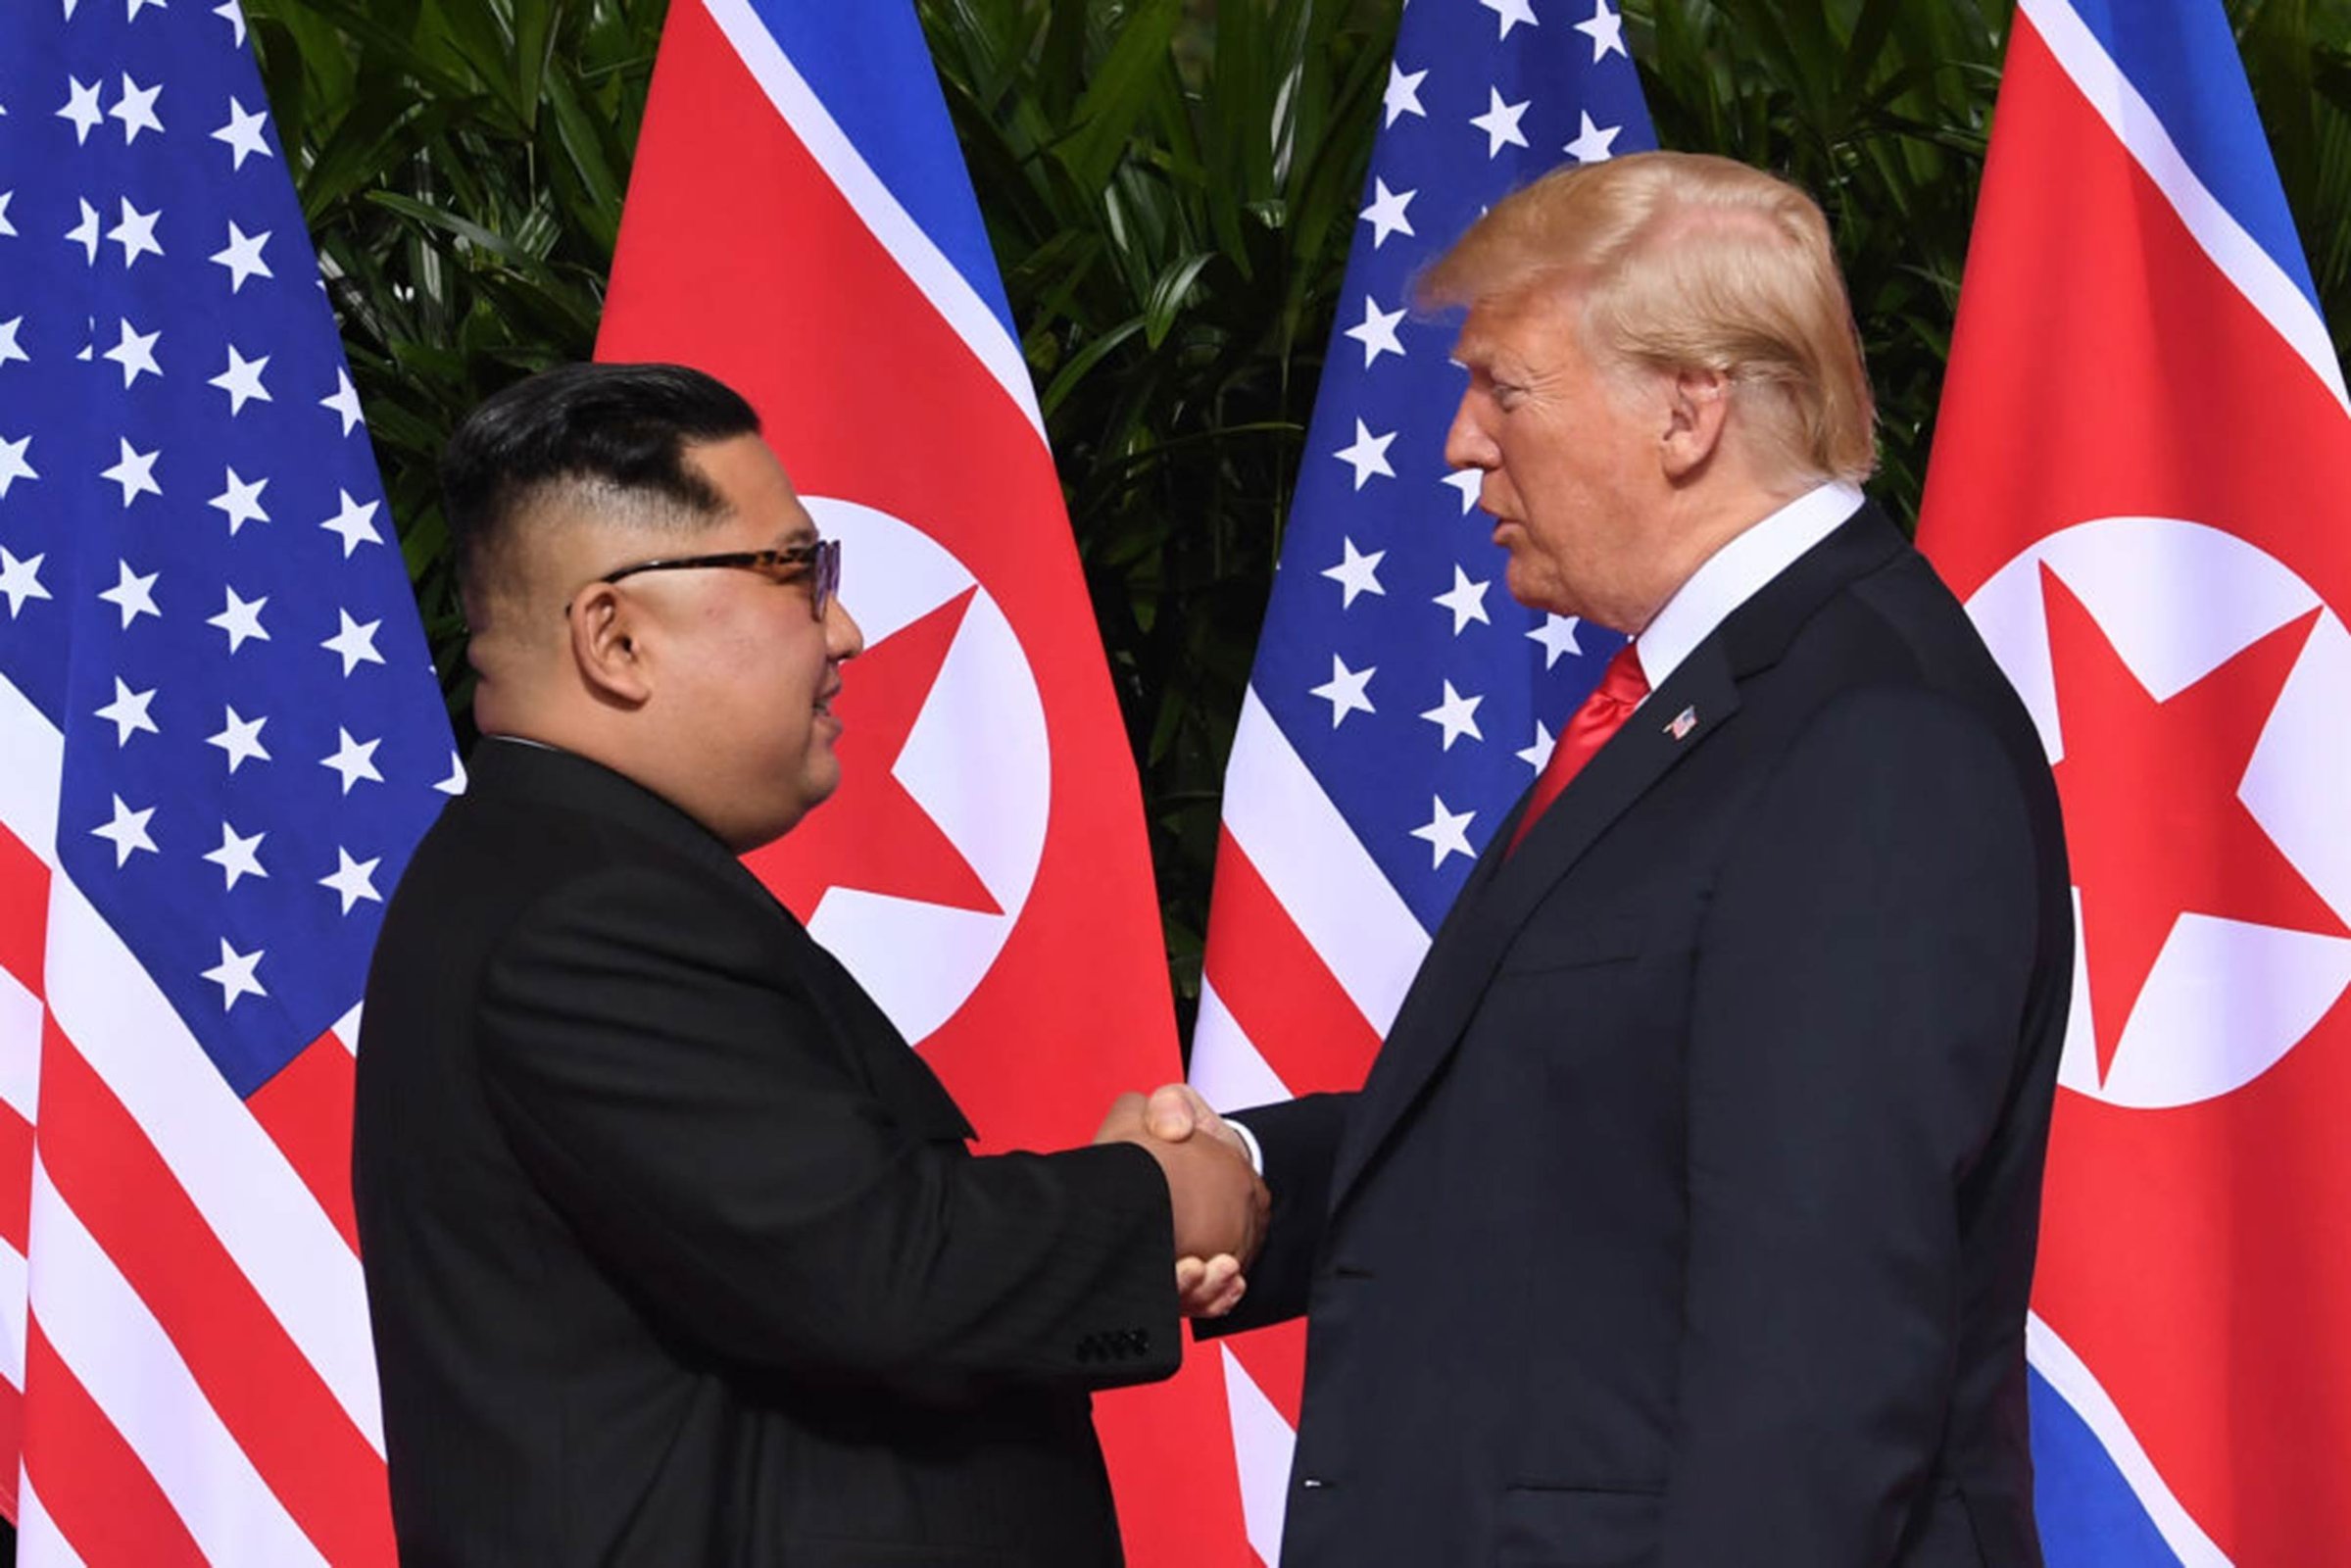 The President of the United States Donald Trump and North Korea's leader Kim Jong Un shake hands